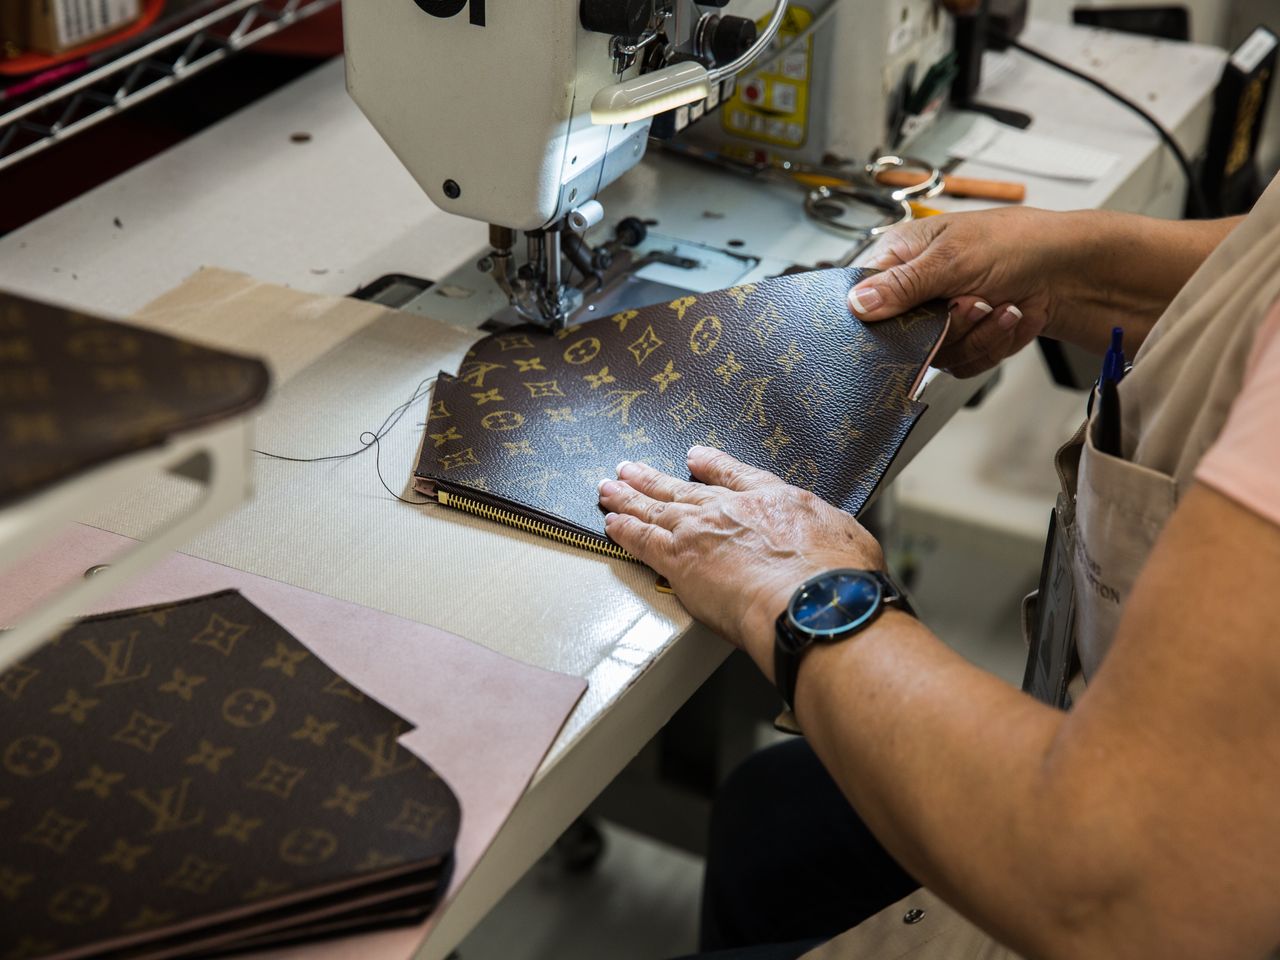 What Are The Louis Vuitton Canvas Bags Made Of?